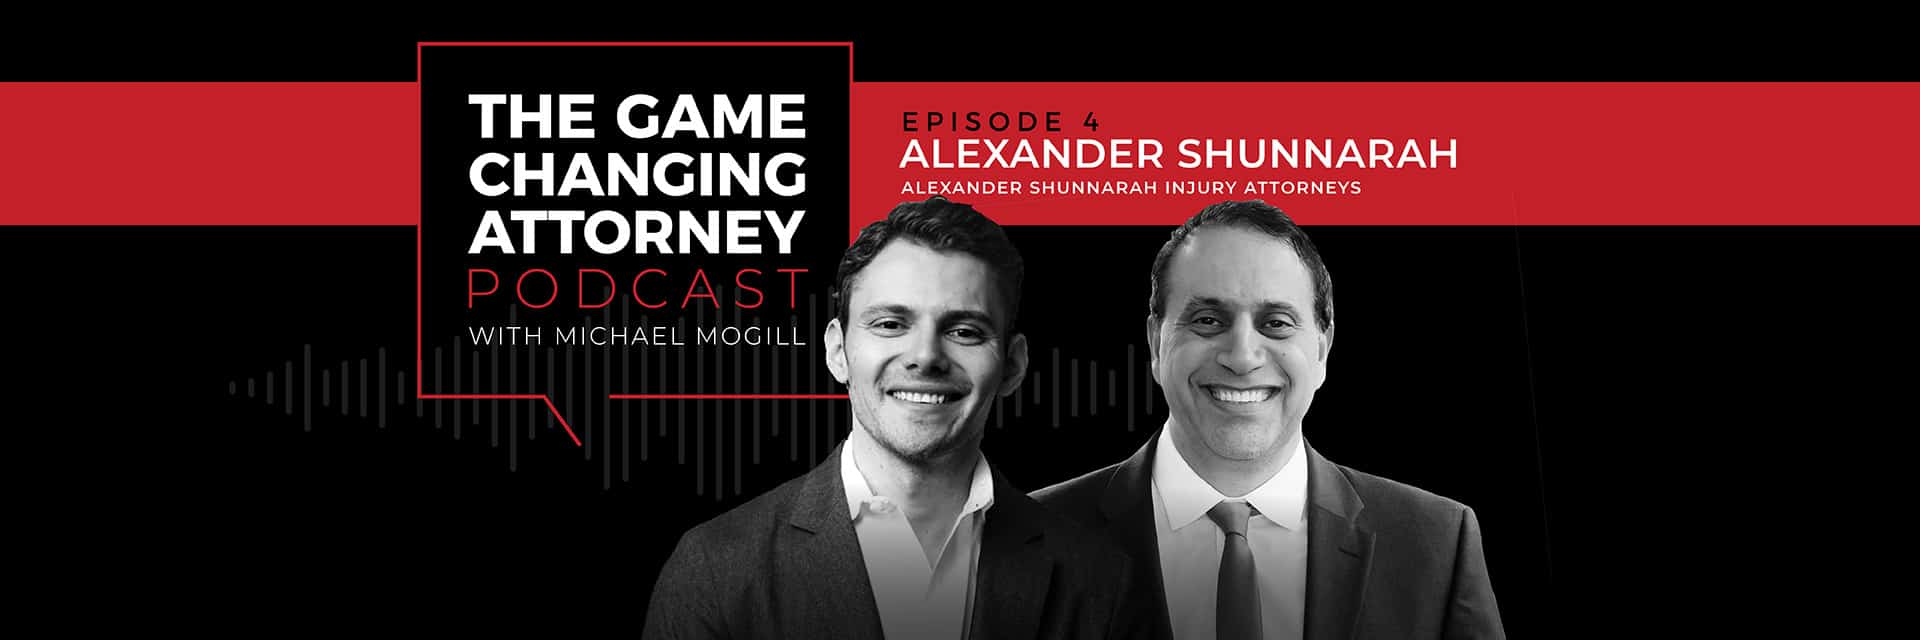 The Game Changing Attorney Podcast - Alexander Shunnarah 3